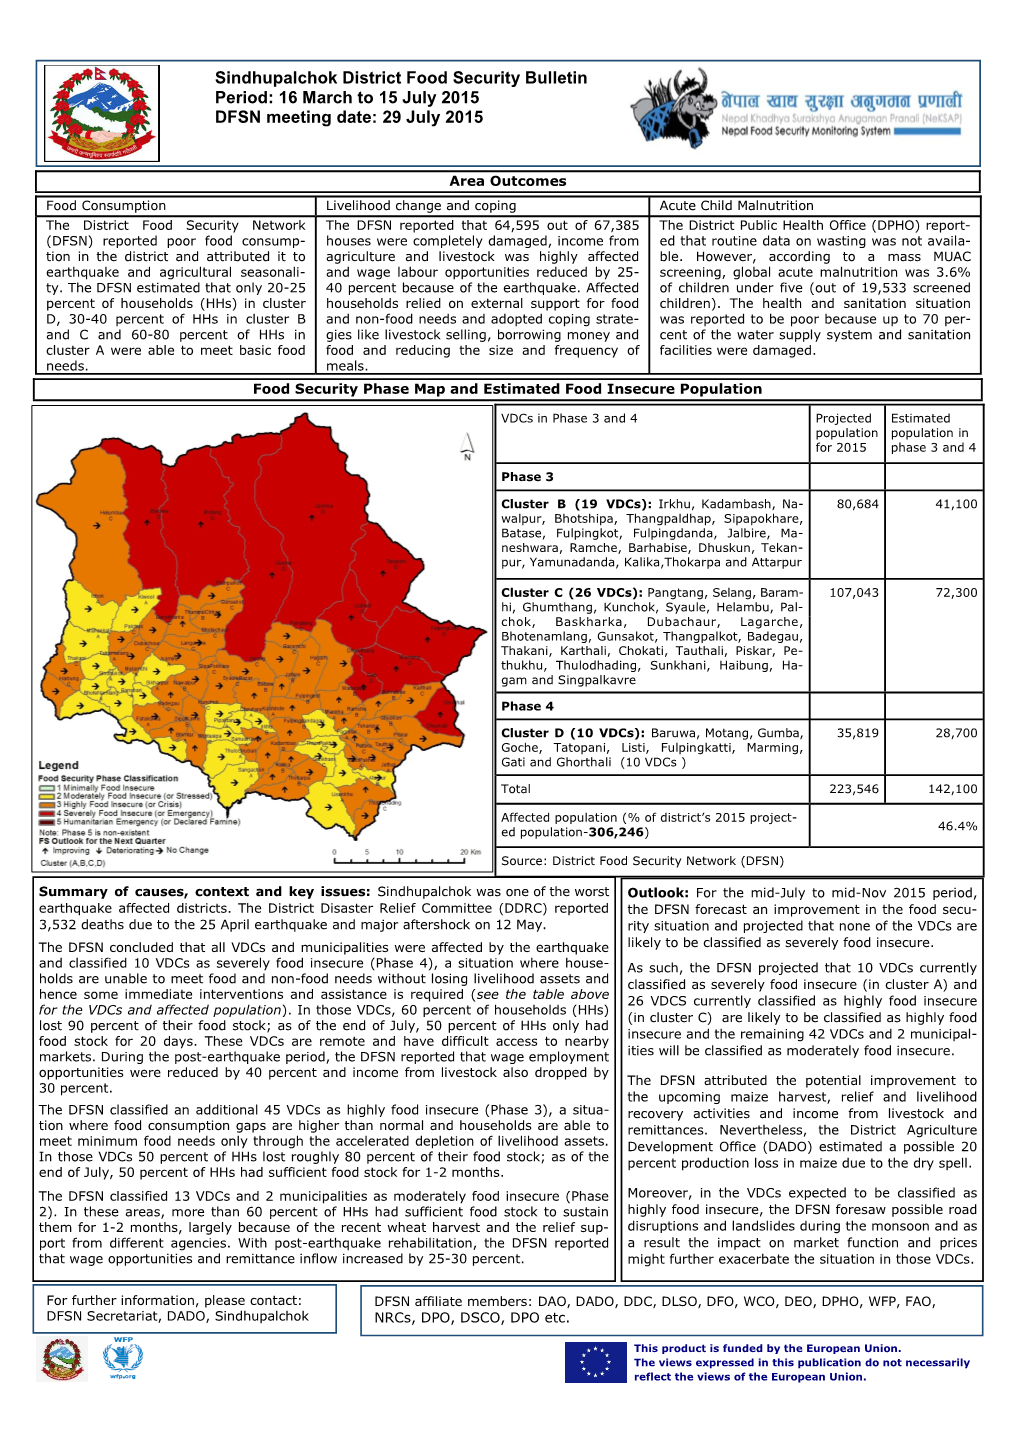 Sindhupalchok District Food Security Bulletin Period: 16 March to 15 July 2015 DFSN Meeting Date: 29 July 2015